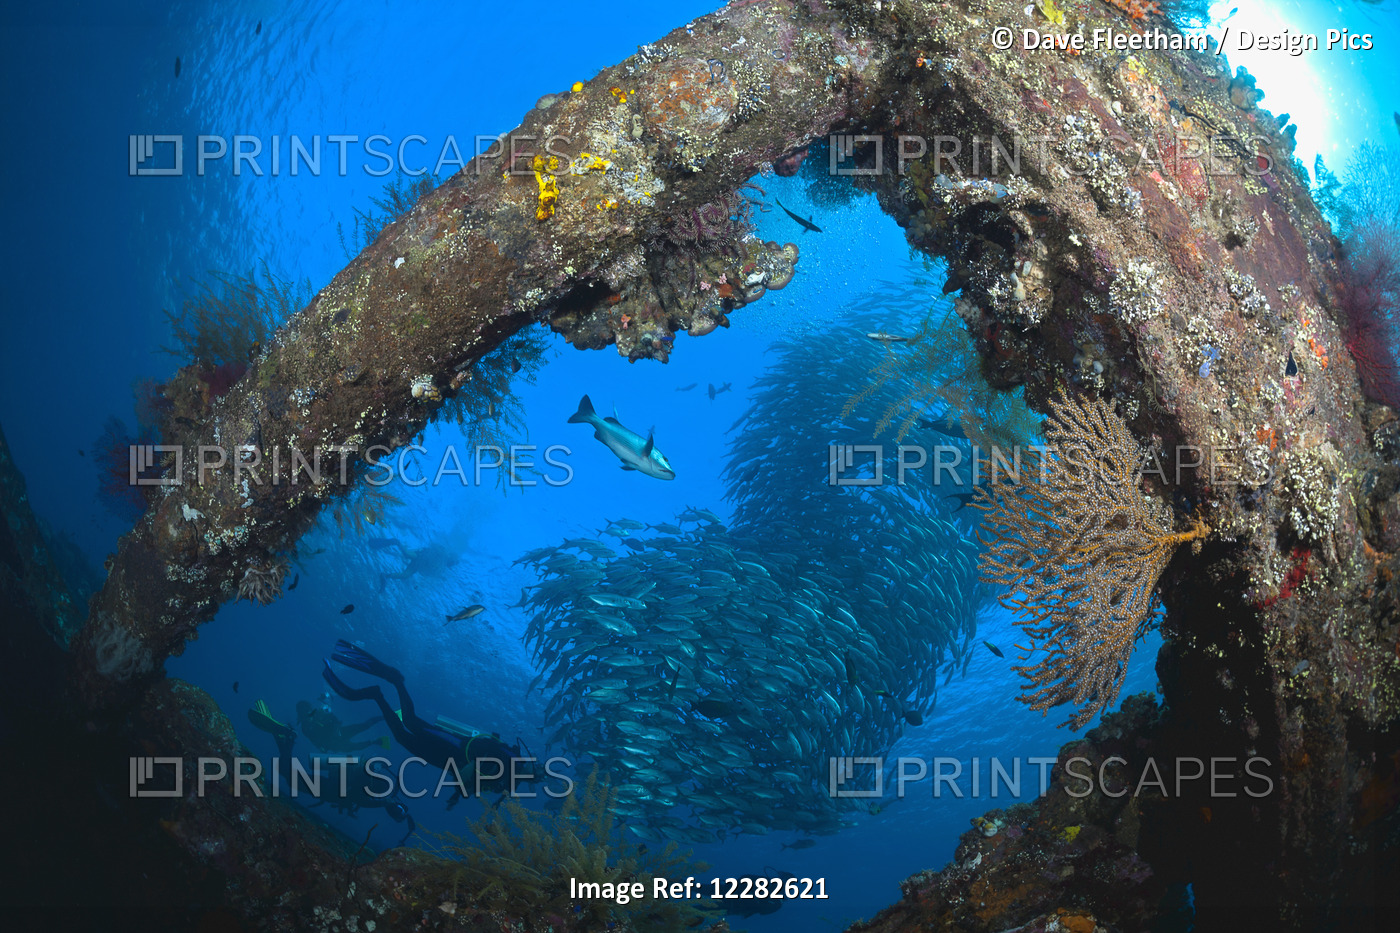 Divers And A School Of Bigeye Jacks (Caranx Sexfasciatus) Framed By Part Of The ...